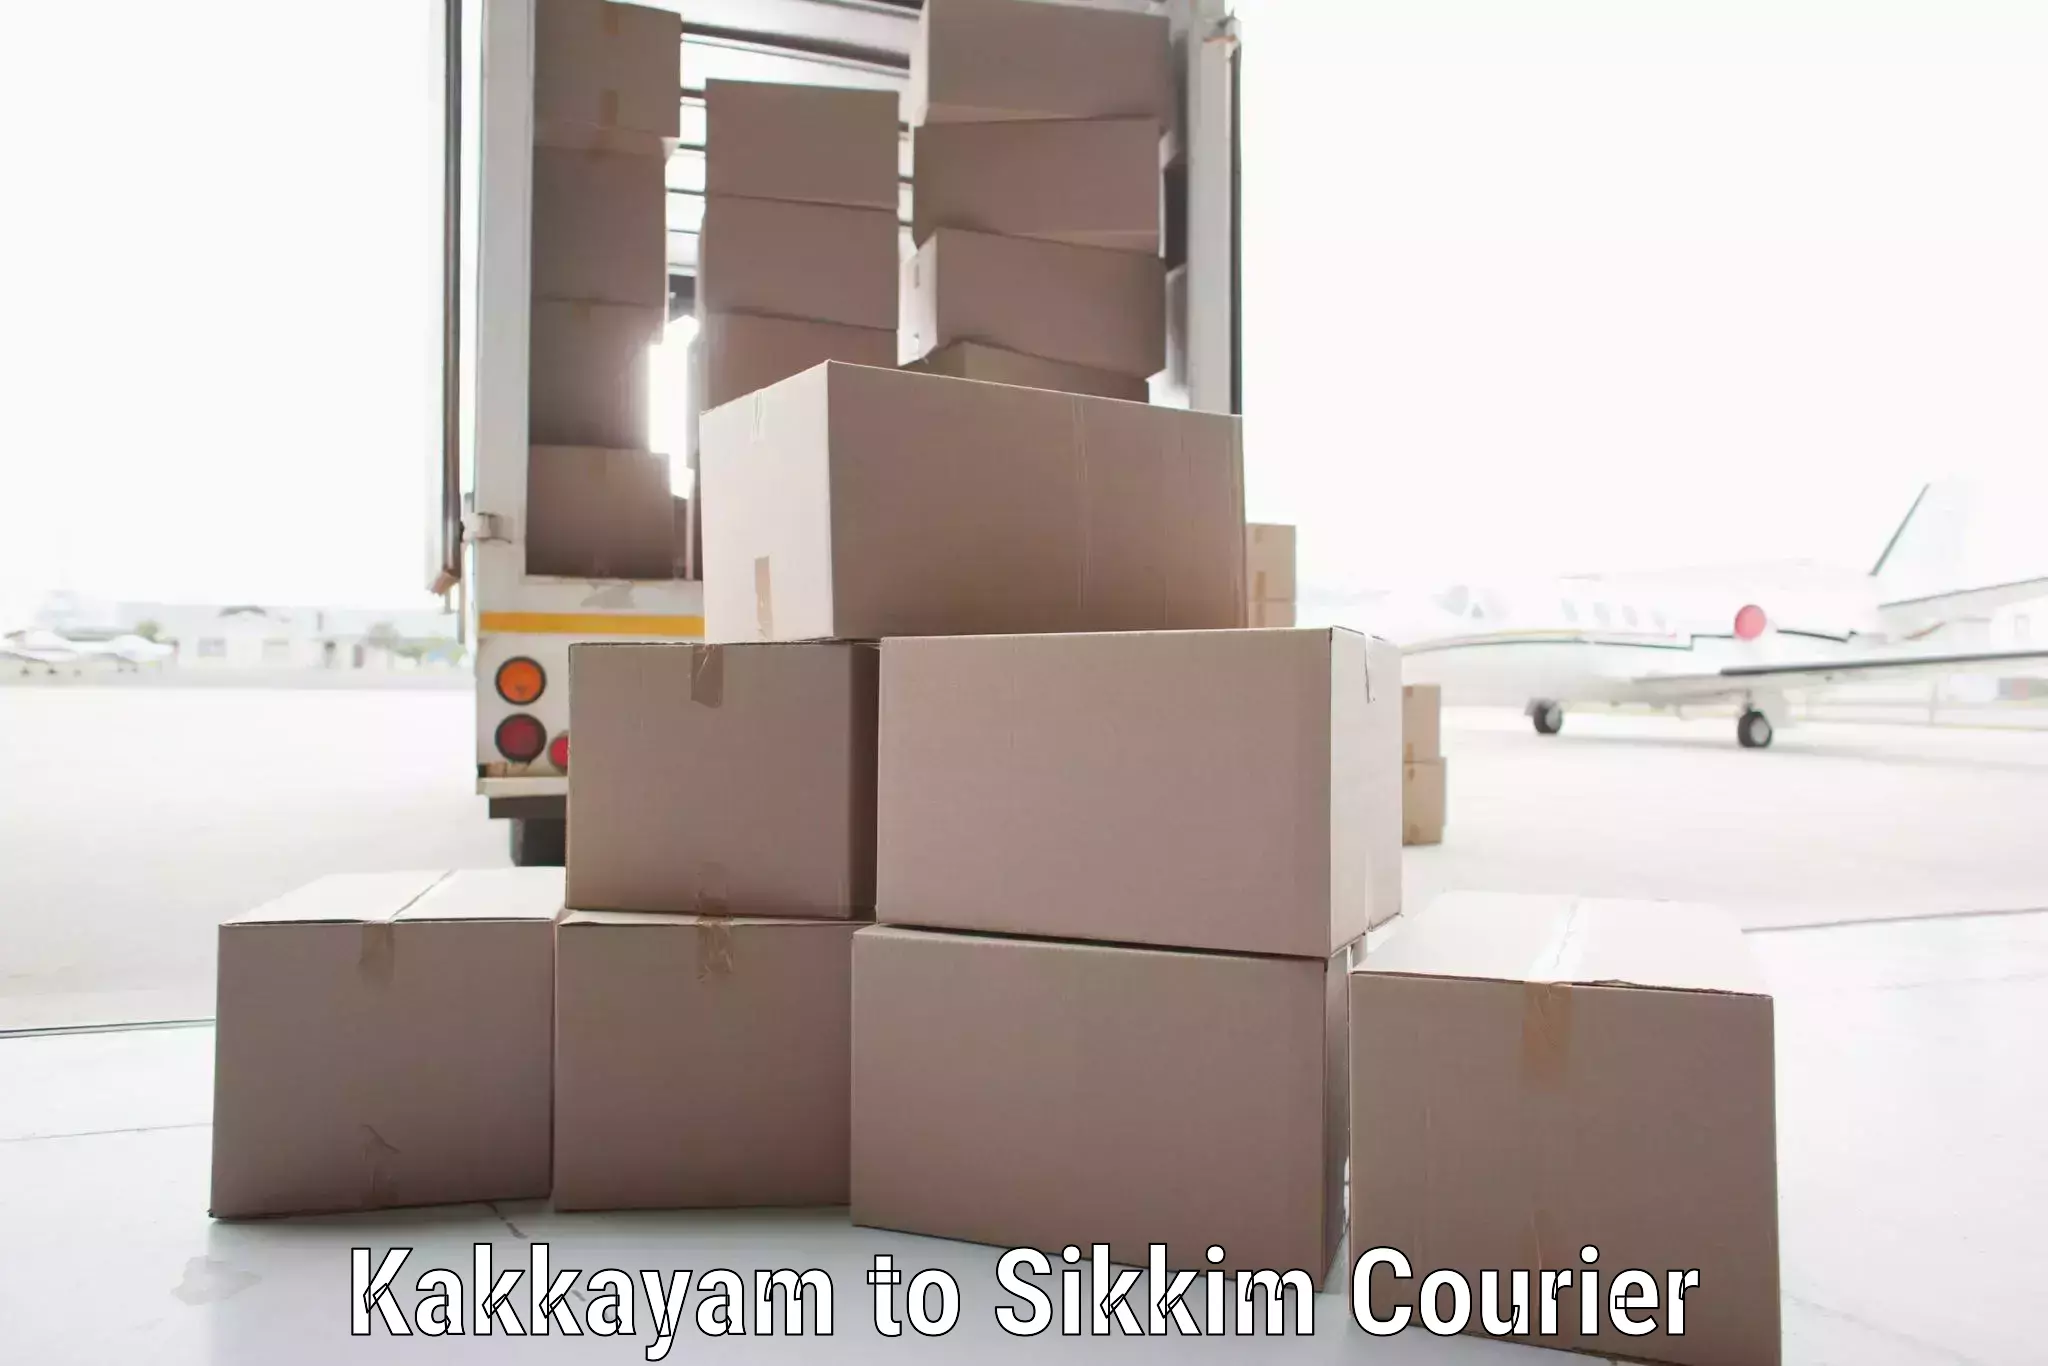 Global shipping networks in Kakkayam to Sikkim